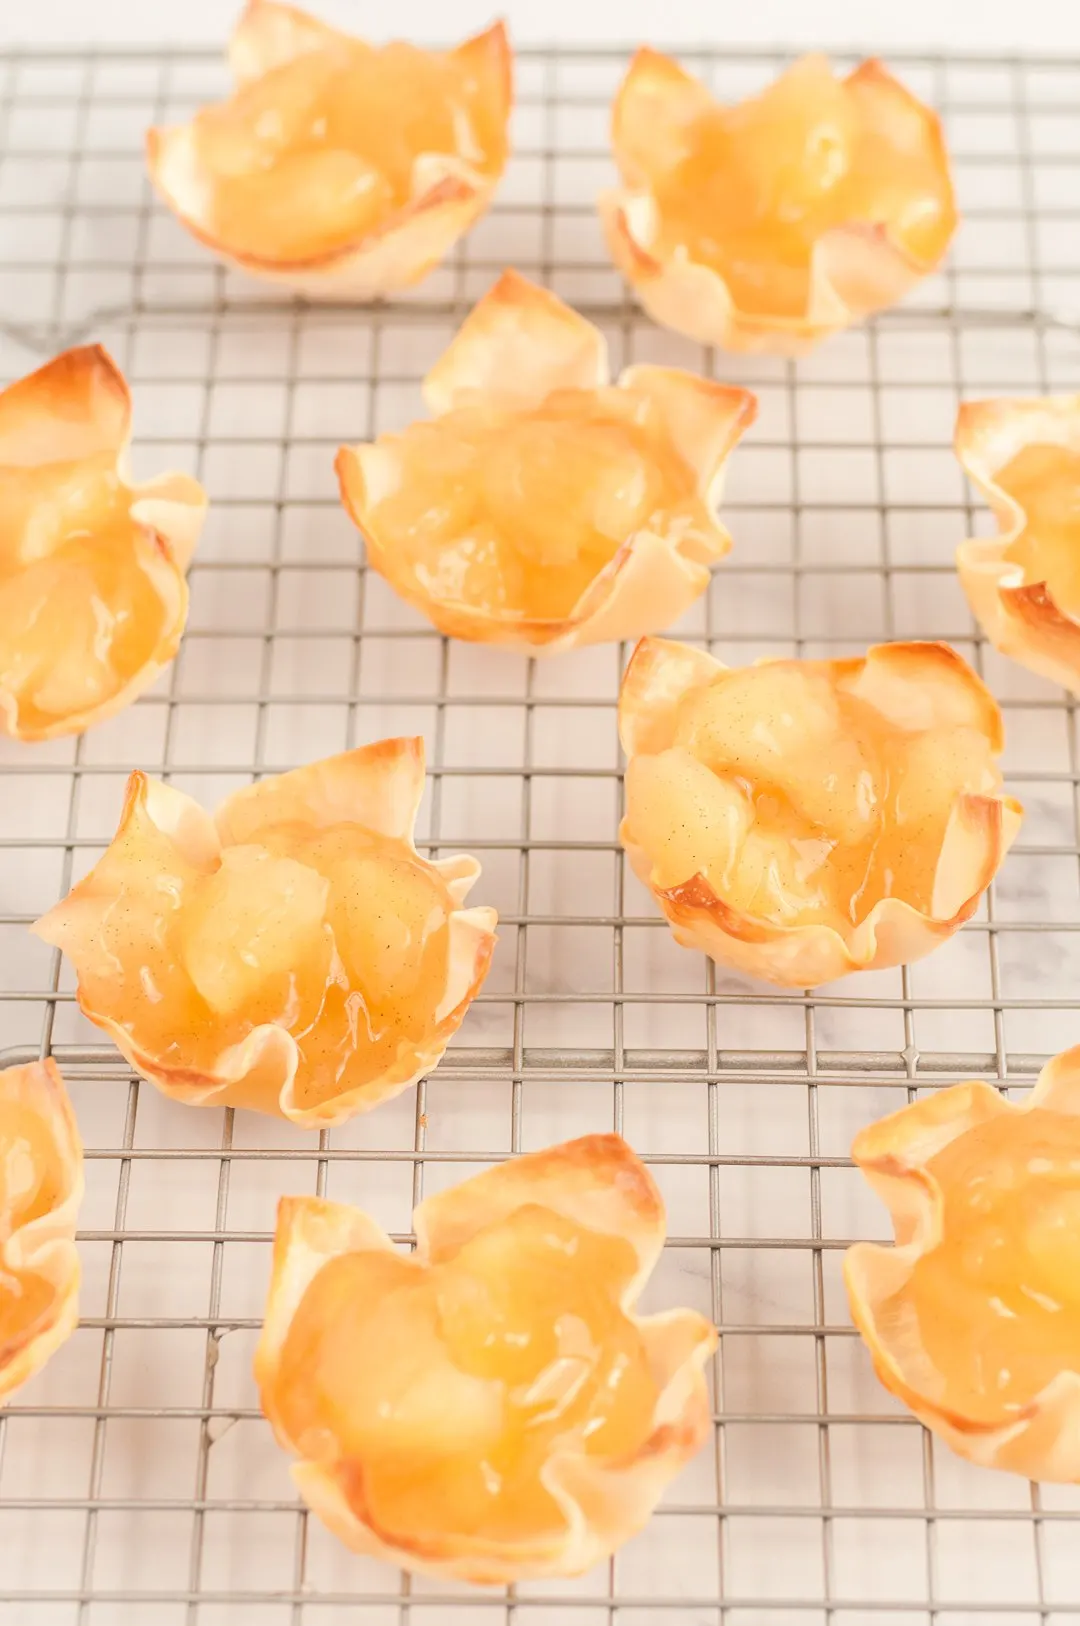 Mini Pies in Wonton Wrappers with Apple Pie Filling inside